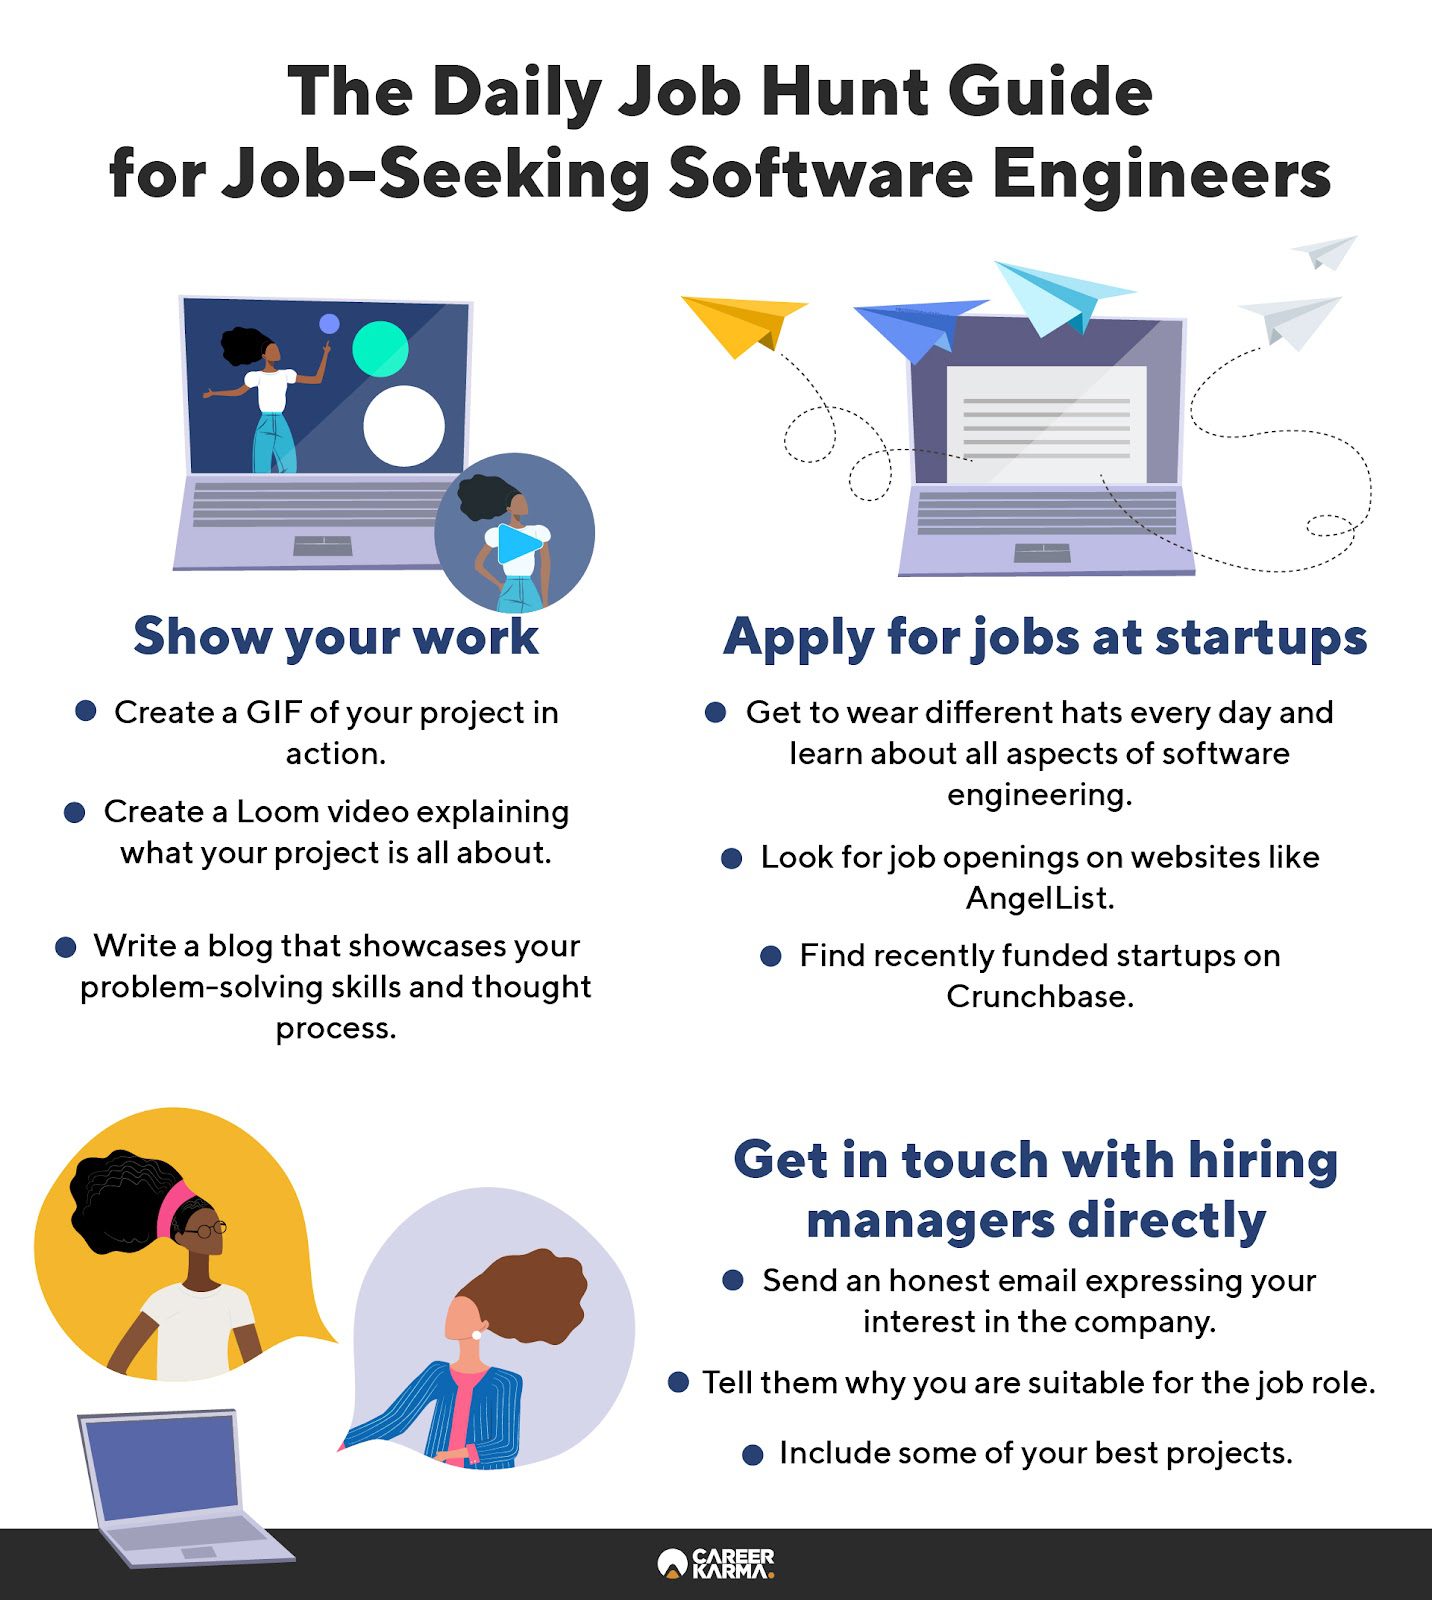 An infographic highlighting The Daily Job Hunt’s tips for job-seeking software engineers